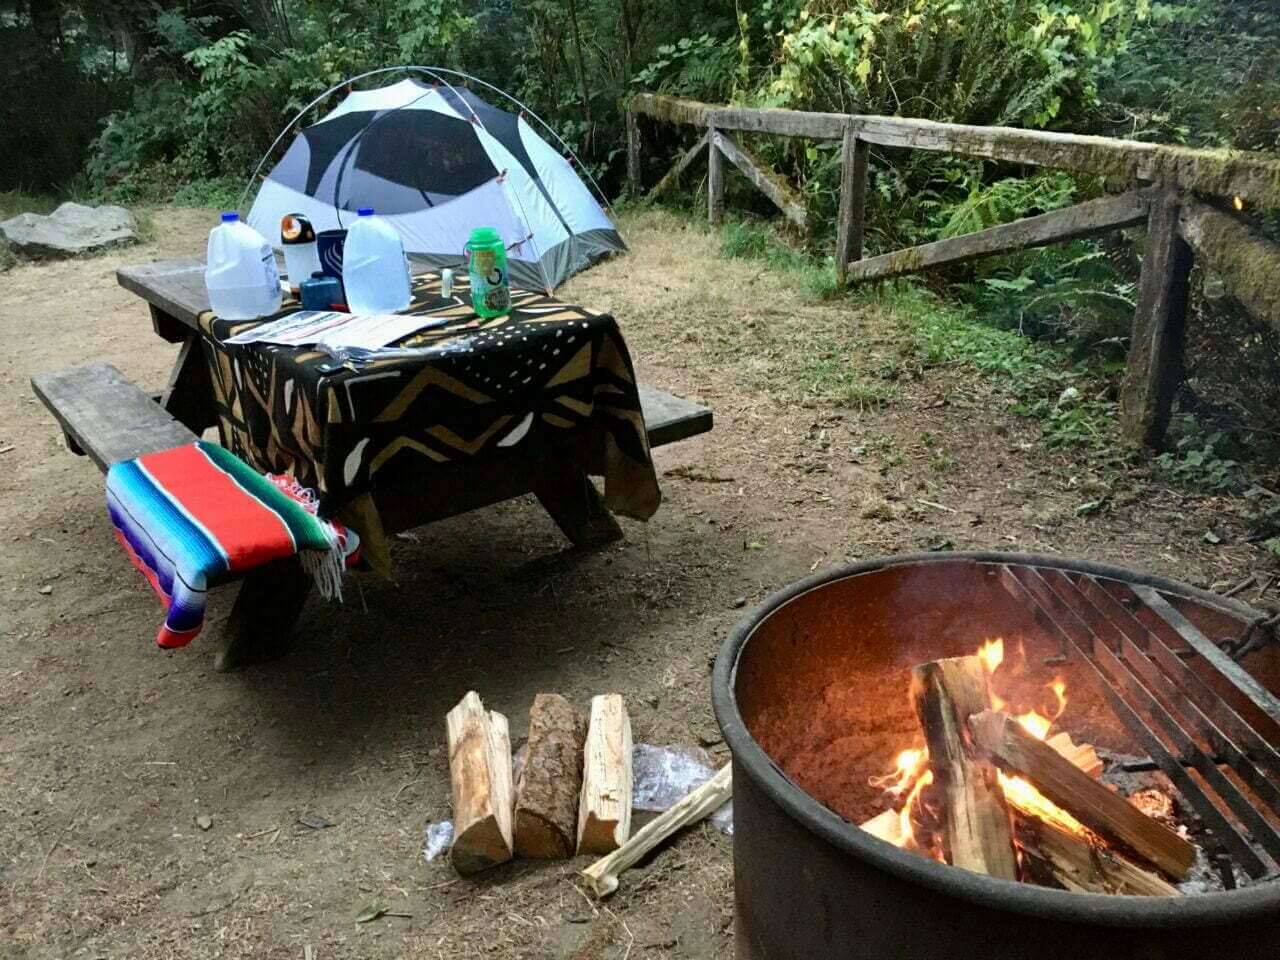 Building a campfire is an essential camping experience.